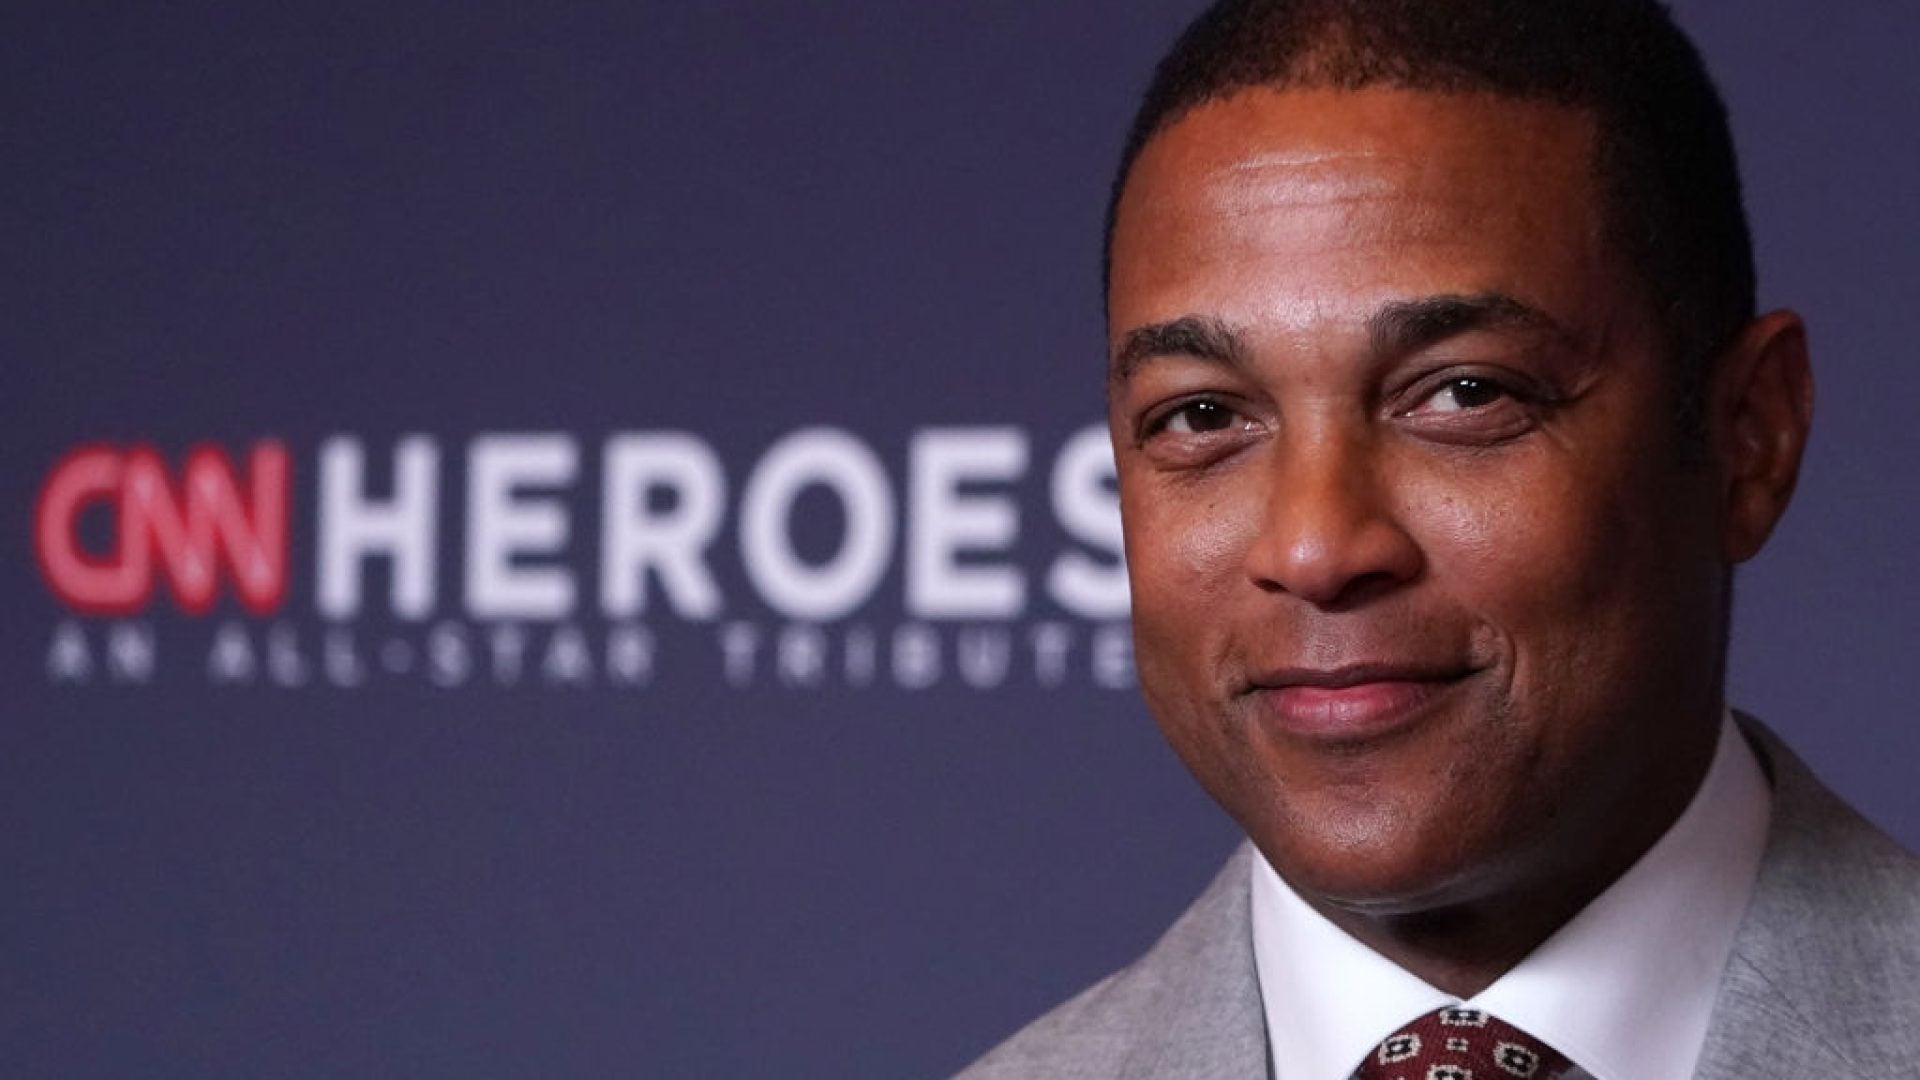 "I Am Stunned": Don Lemon Responds To Being Fired From CNN